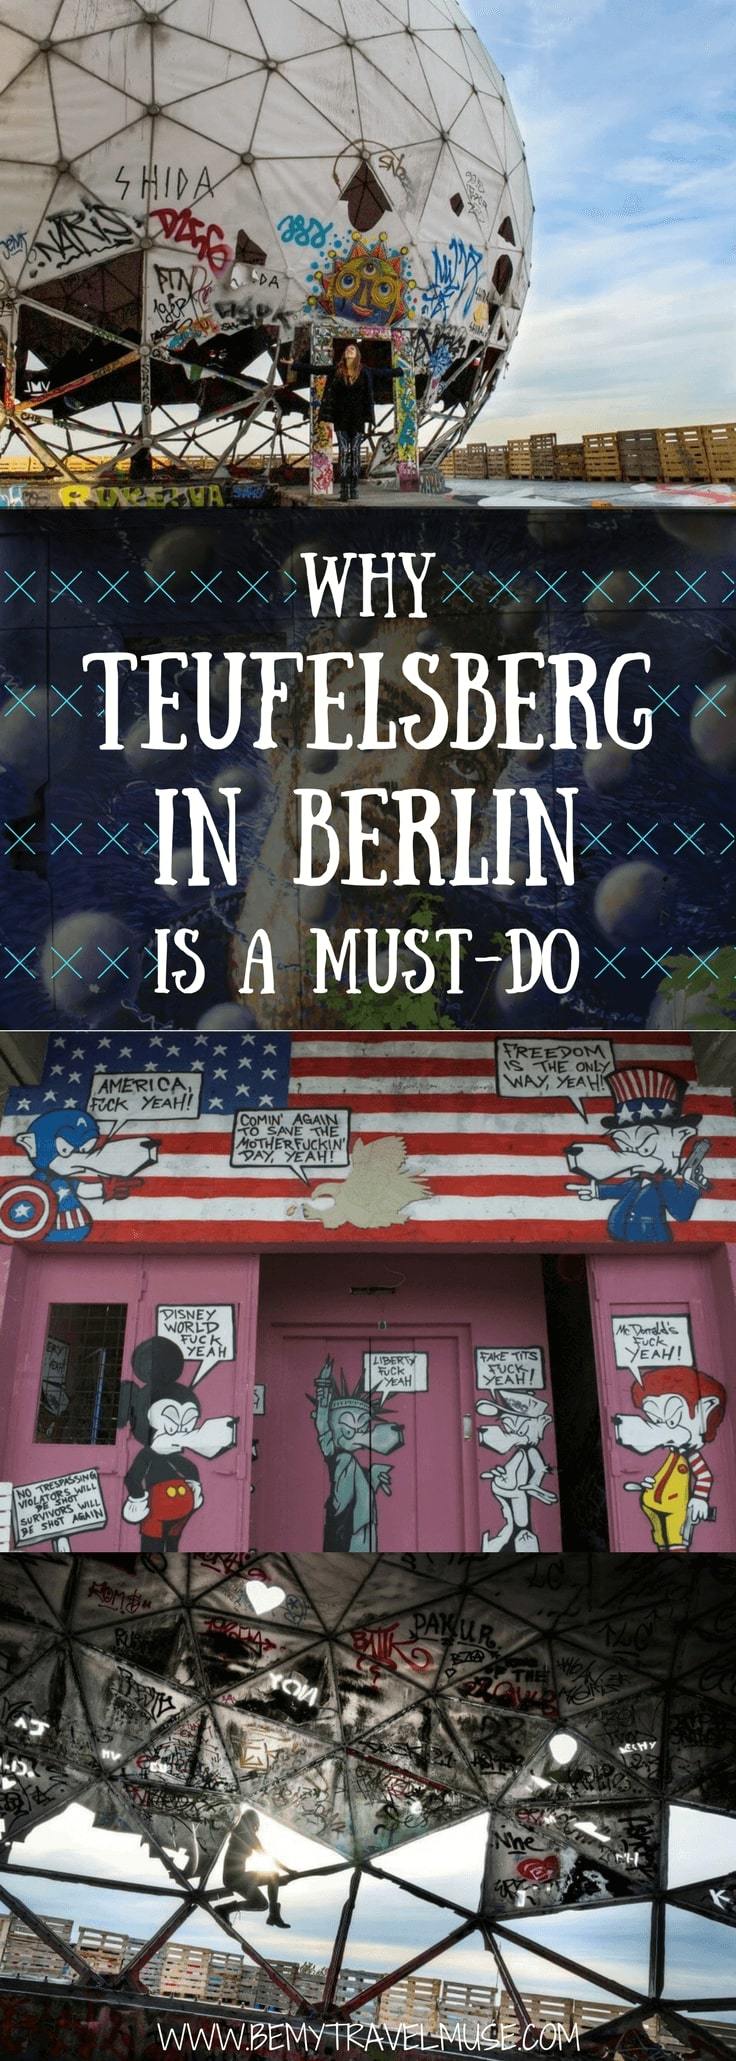 Devil’s Mountain, or Teufelsberg, is a must-do when you visit Berlin. It's a bit of a trek, but the view and the insane amount of graffiti will blow you away | Be My Travel Muse #Teufelsberg #BerlinTravelGuide